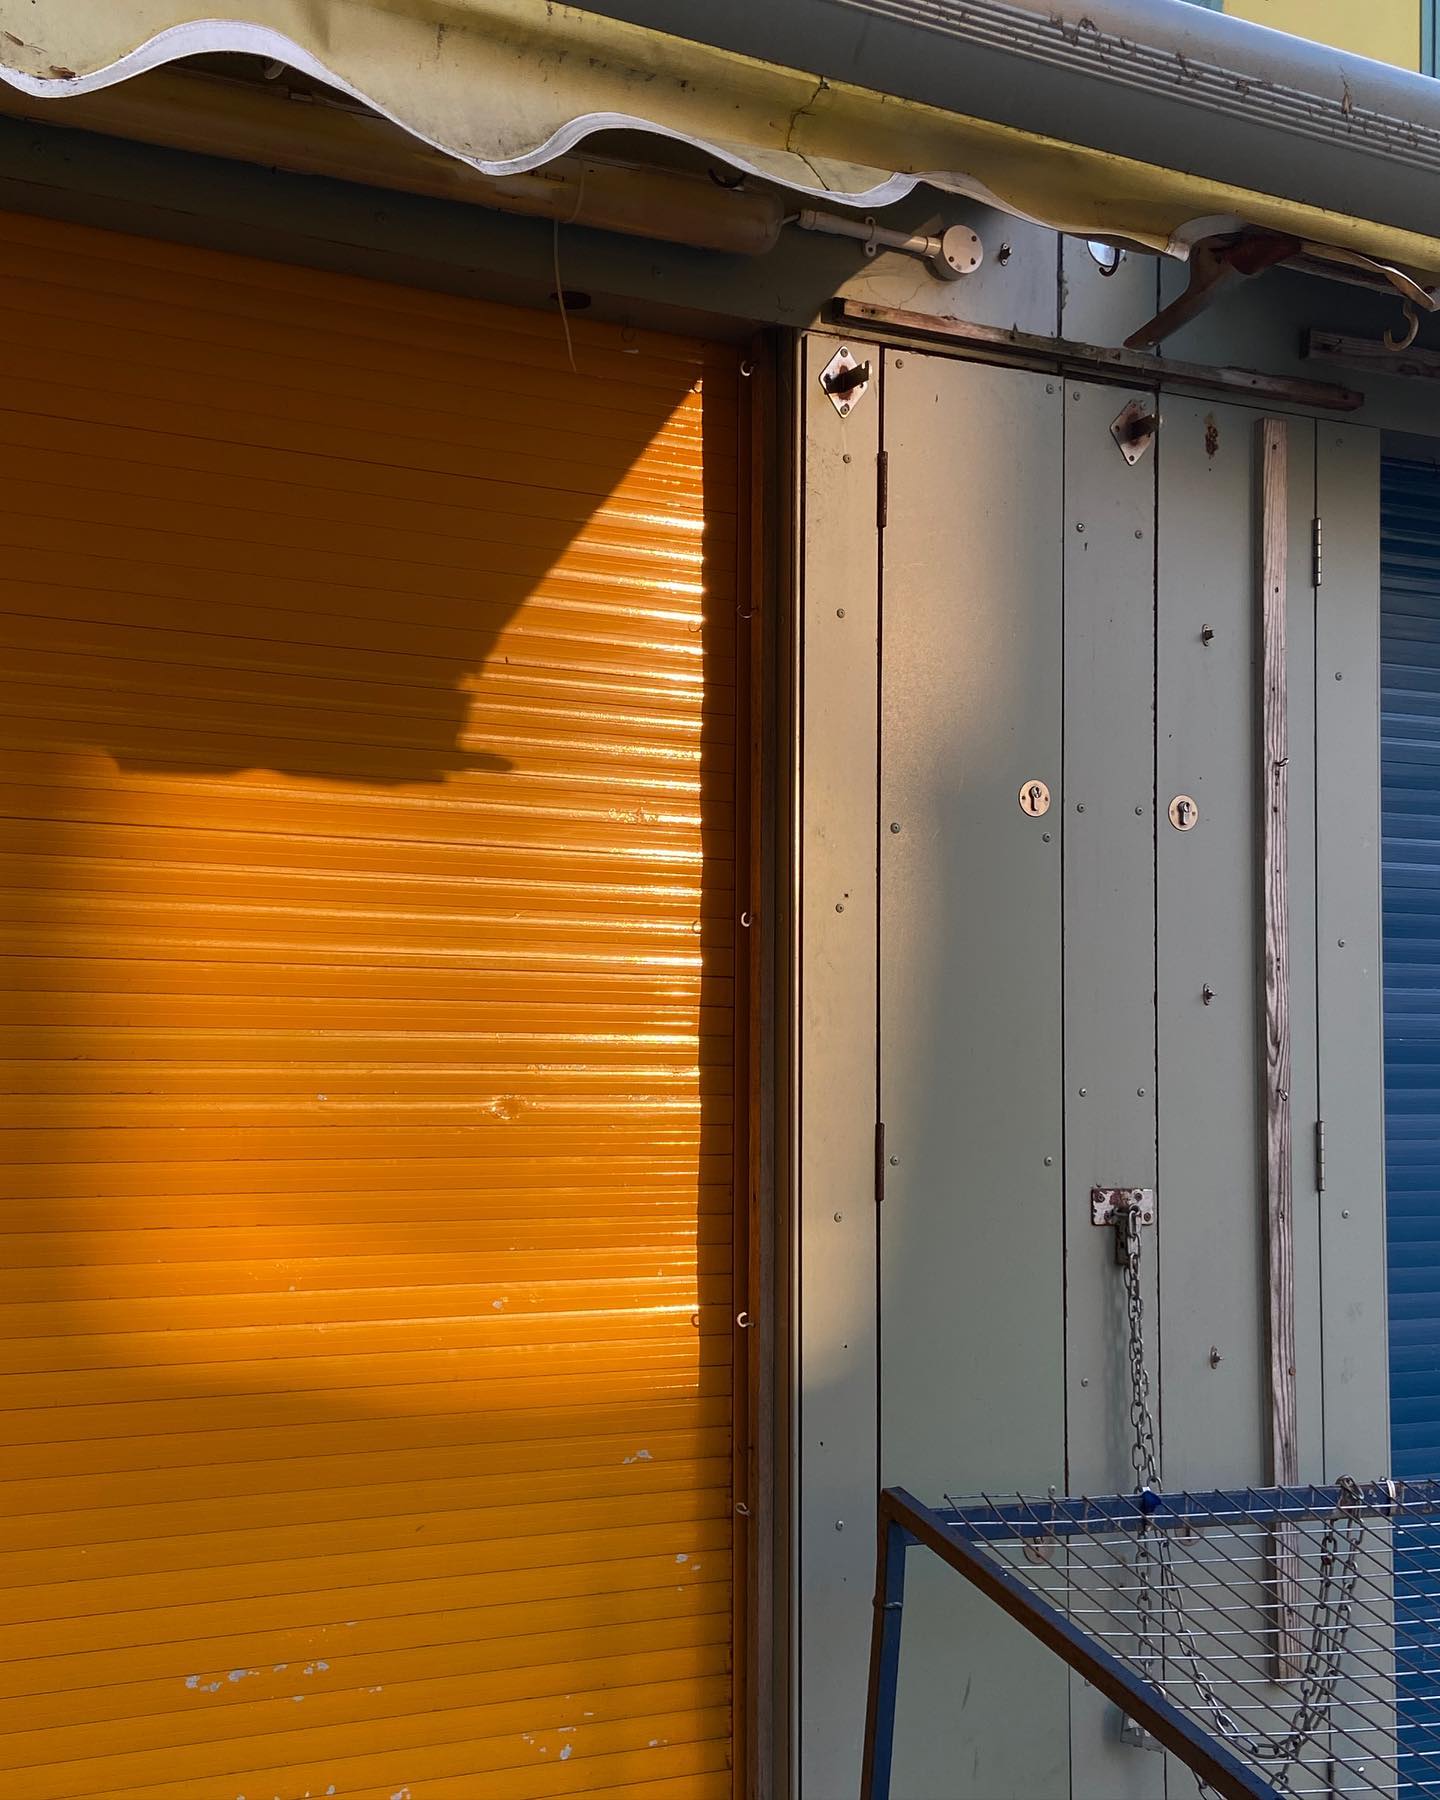 orange sunlight falls on yellow shutter, close perspective. blue shutter to right